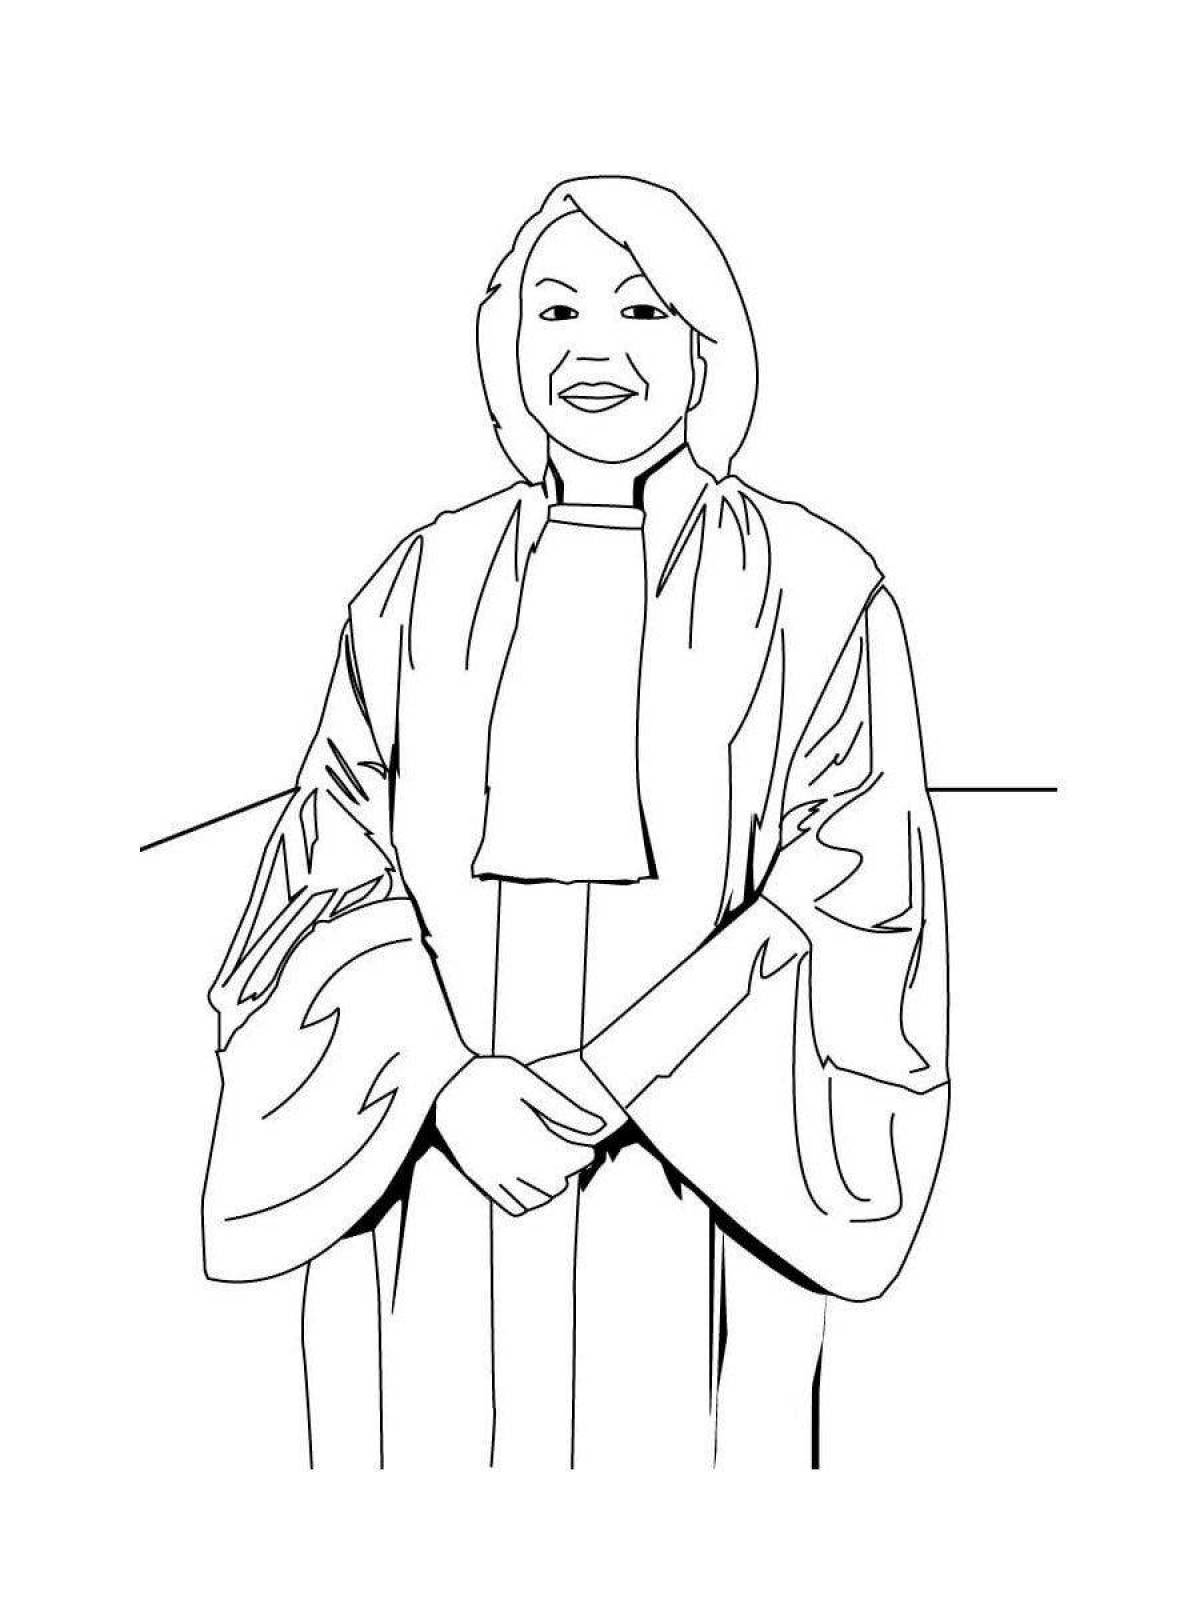 Coloring page majestic lawyer